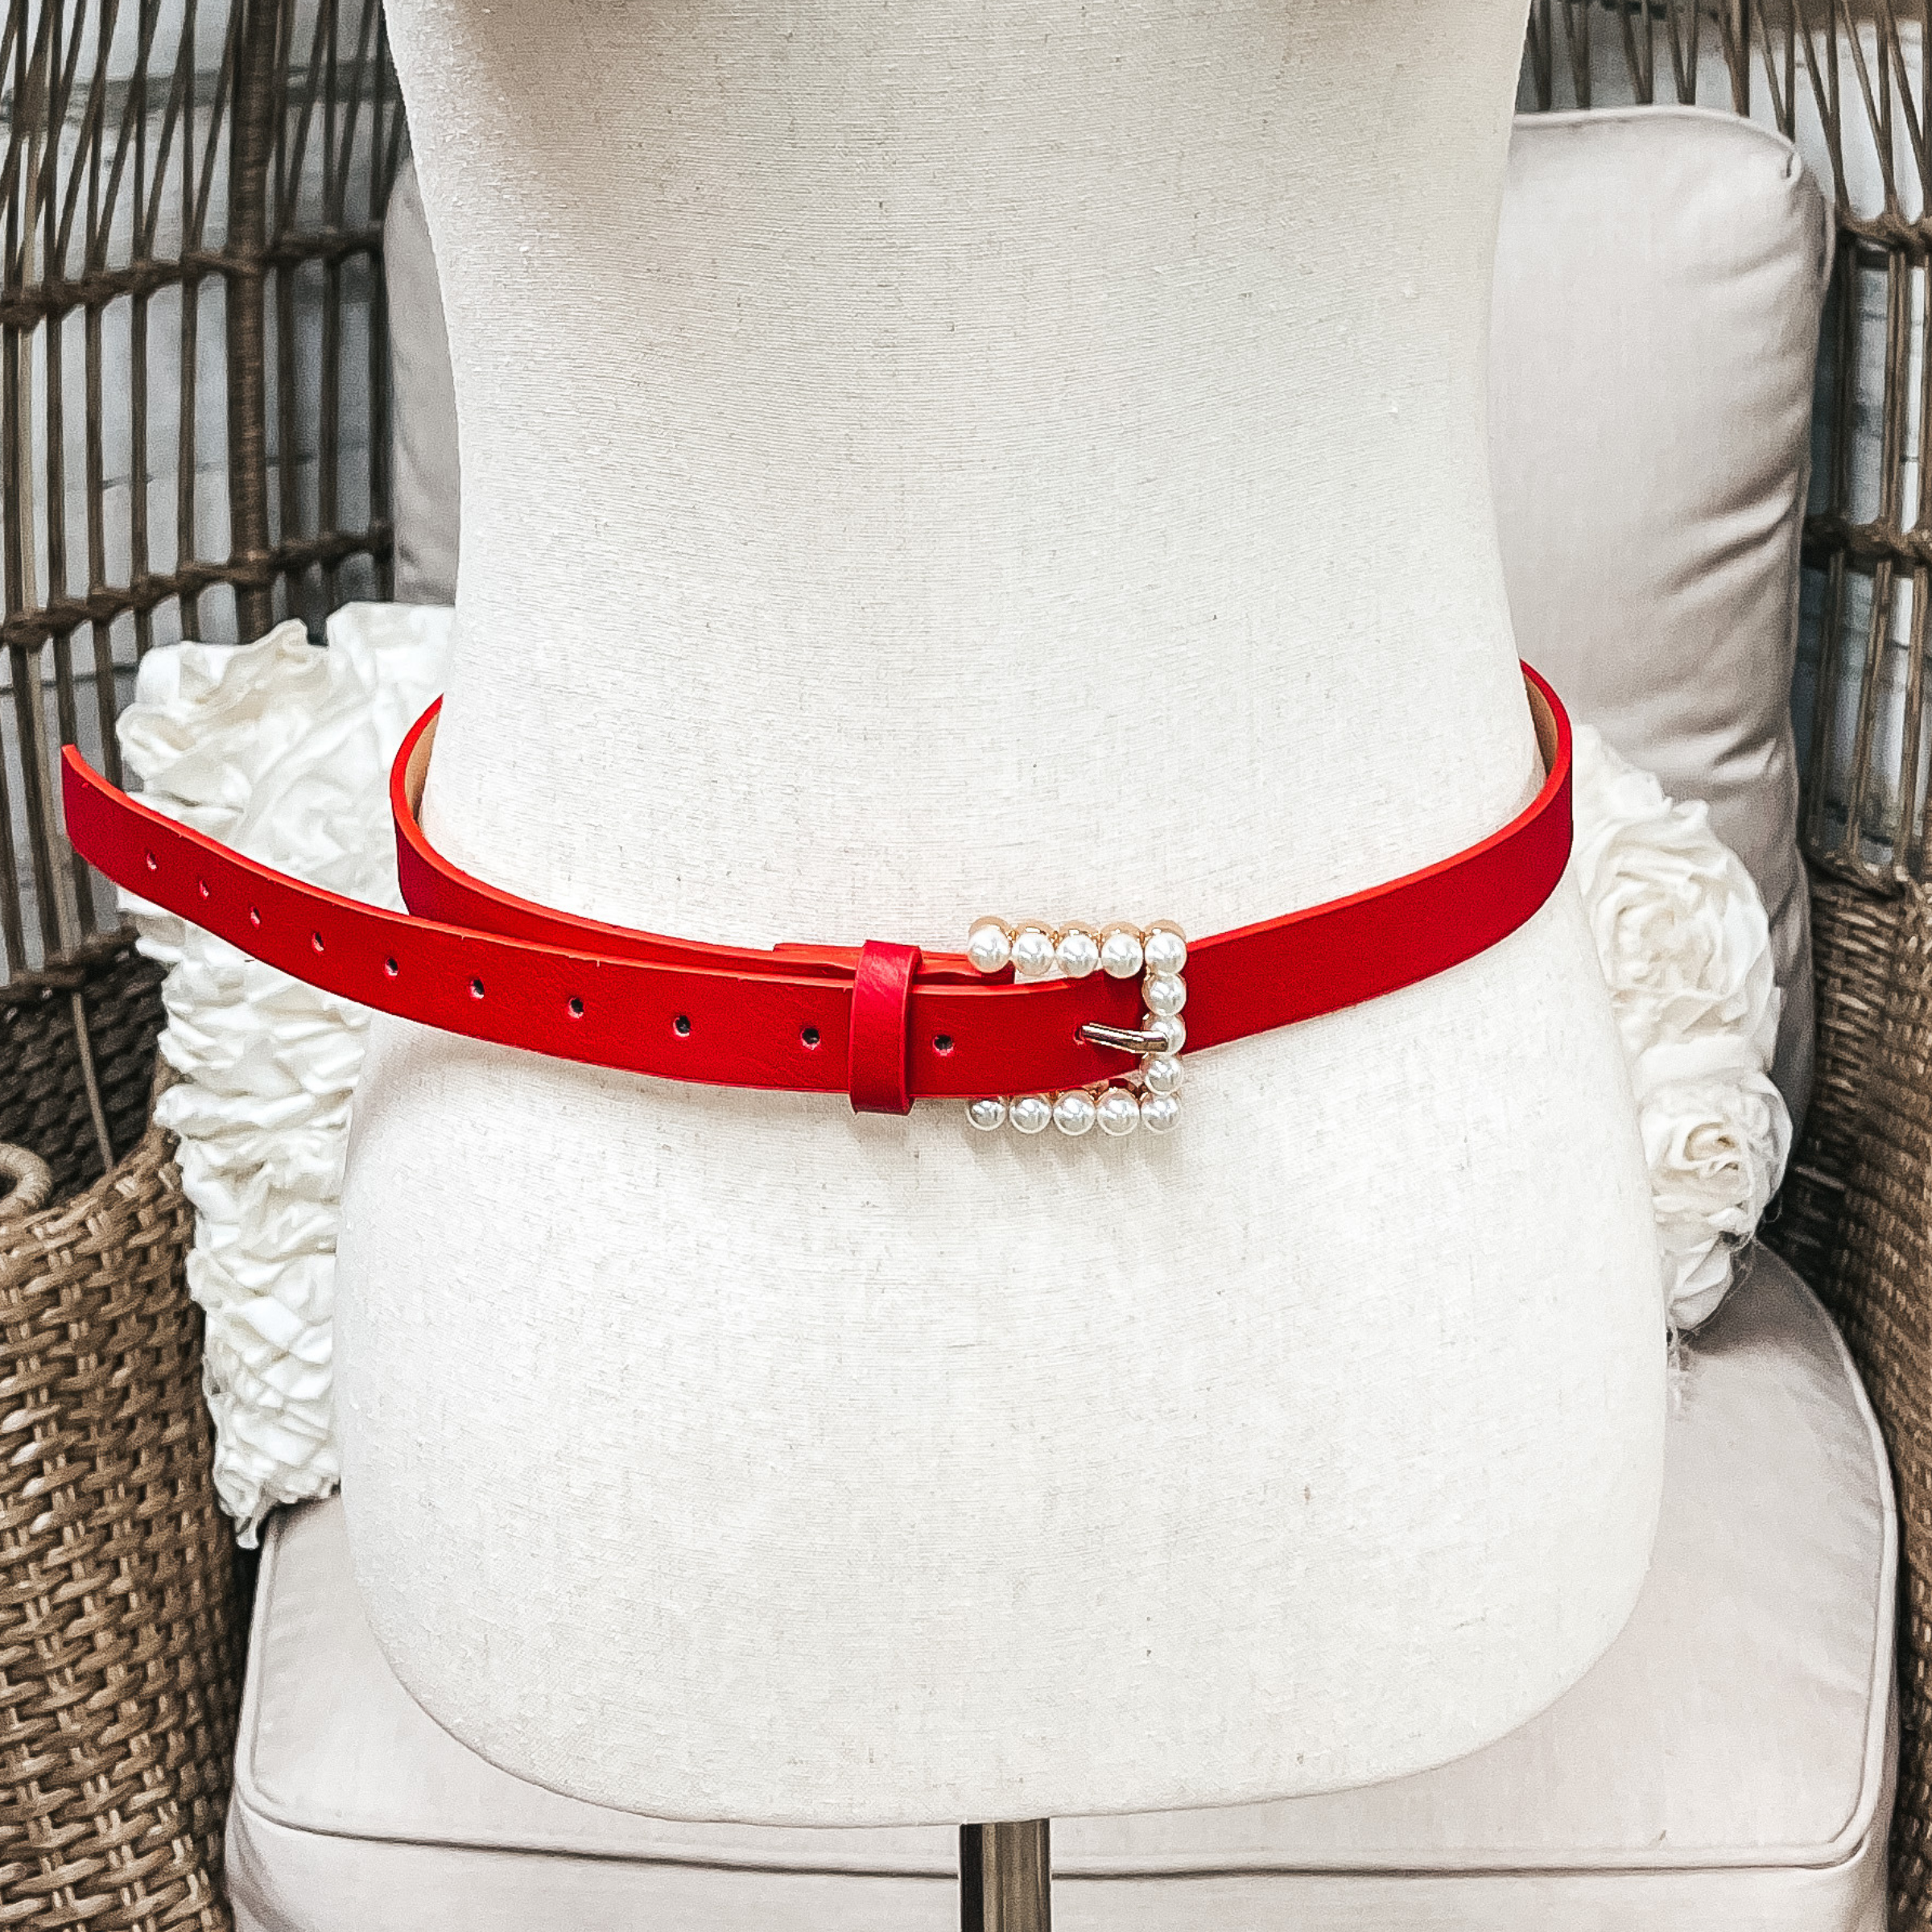 Set of Three | Pearl Embellished Buckle Fashion Belts in Leopard Print Hide, Red, and Black - Giddy Up Glamour Boutique